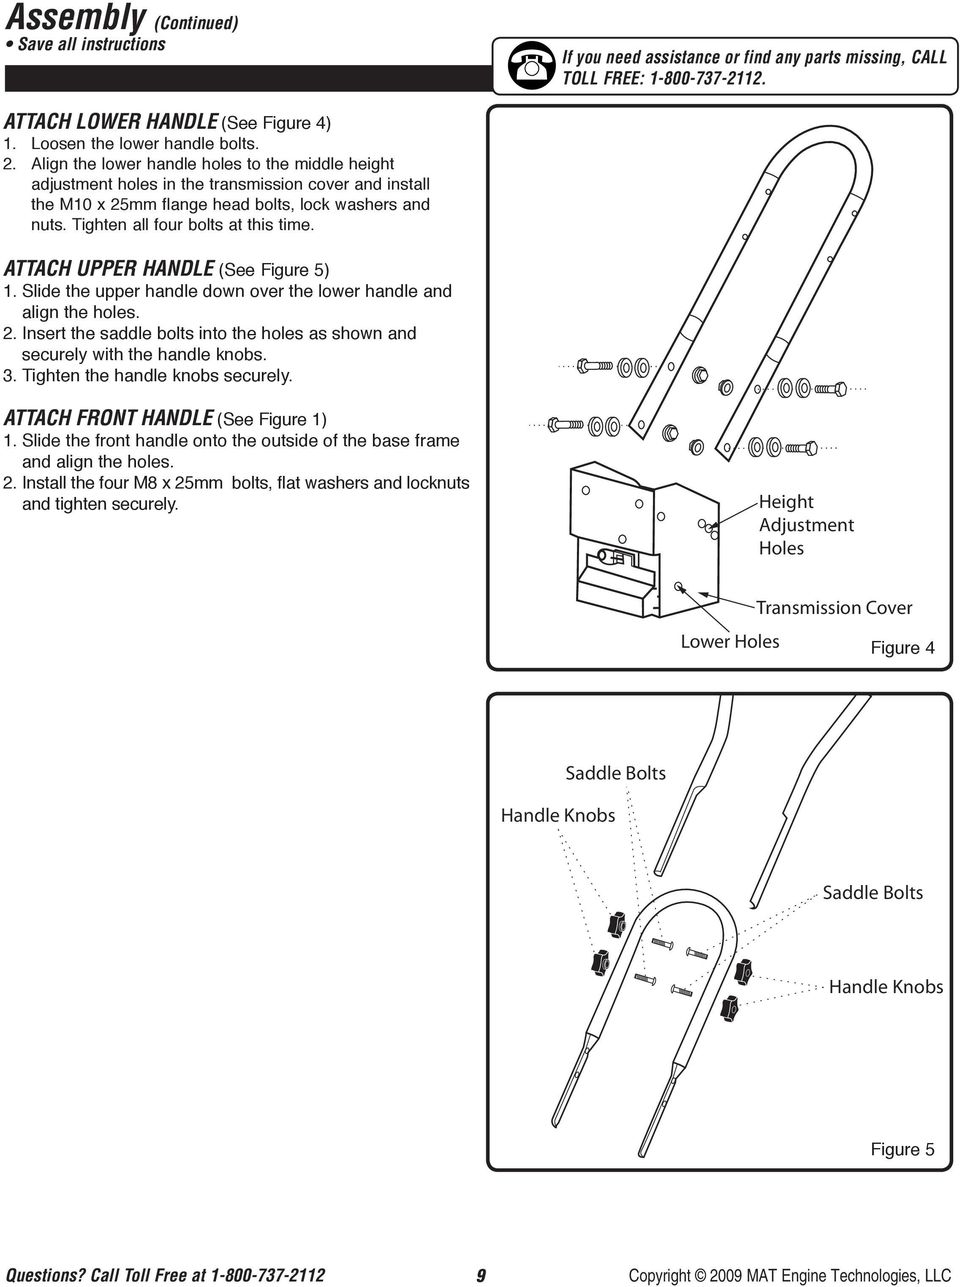 ATTACH UPPER HANDLE (See Figure 5) 1. Slide the upper handle down over the lower handle and align the holes. 2. Insert the saddle bolts into the holes as shown and securely with the handle knobs. 3.